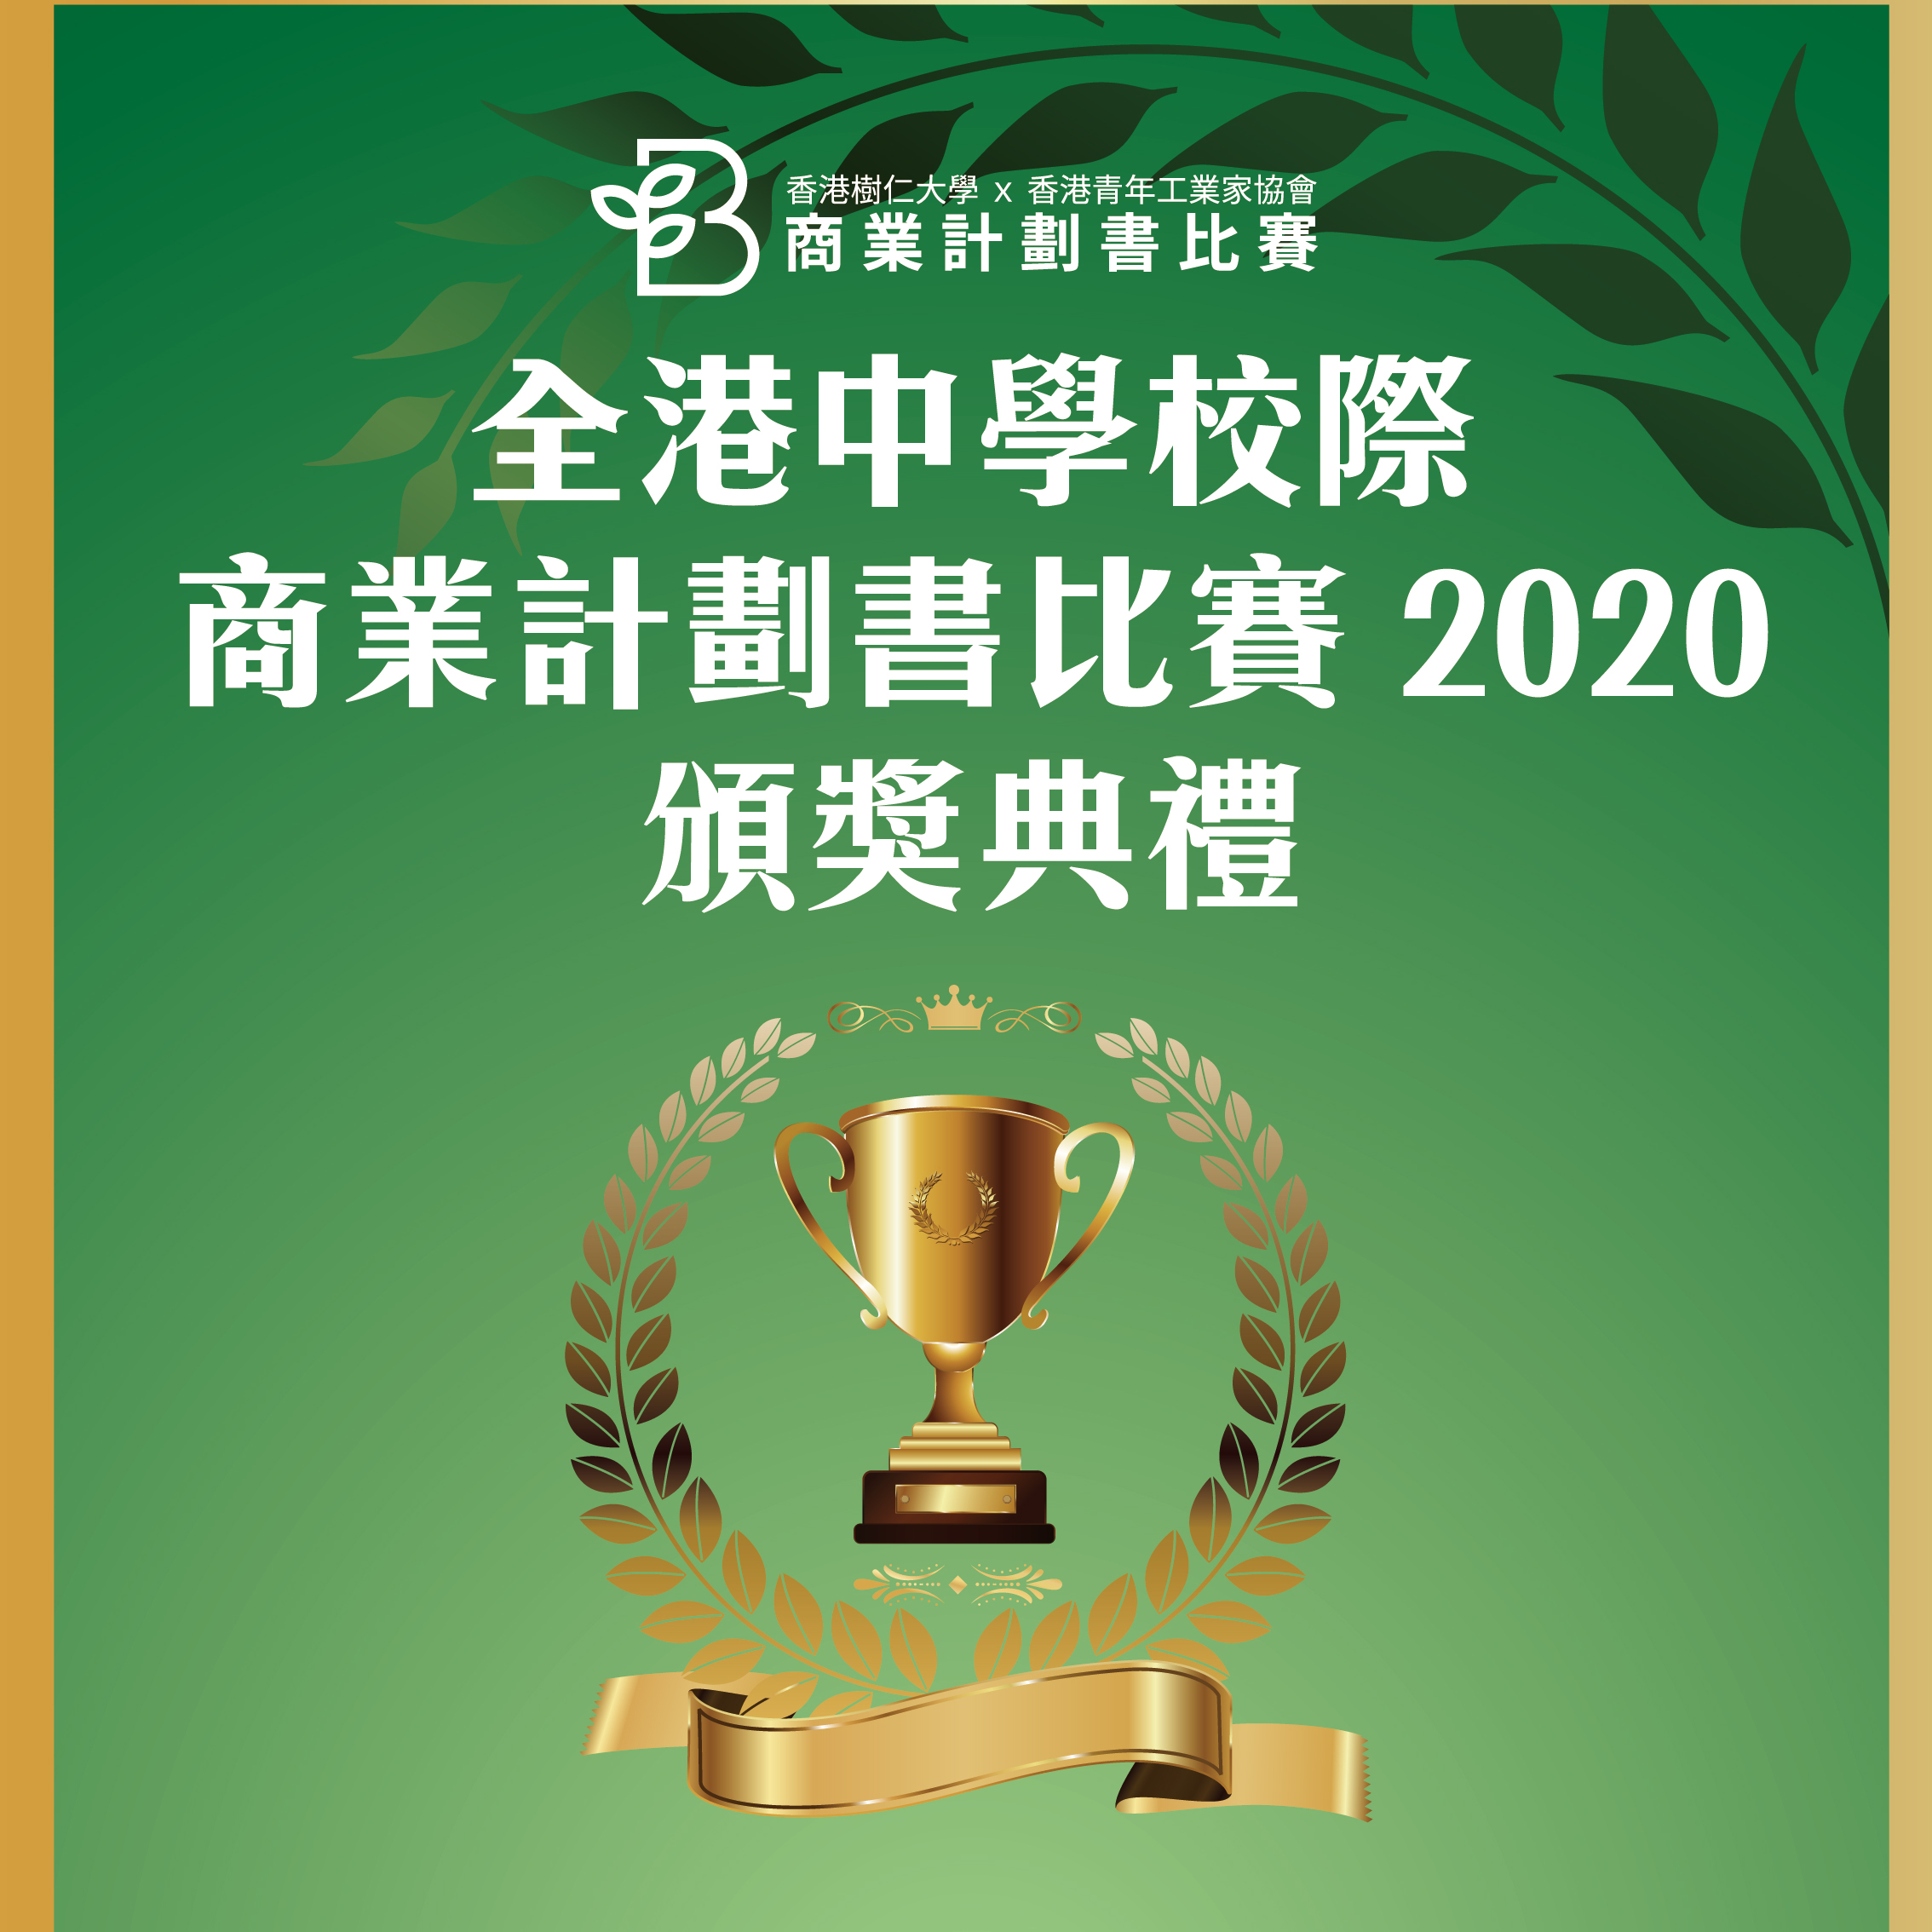 Business Proposal Competition Award Ceremony 2020